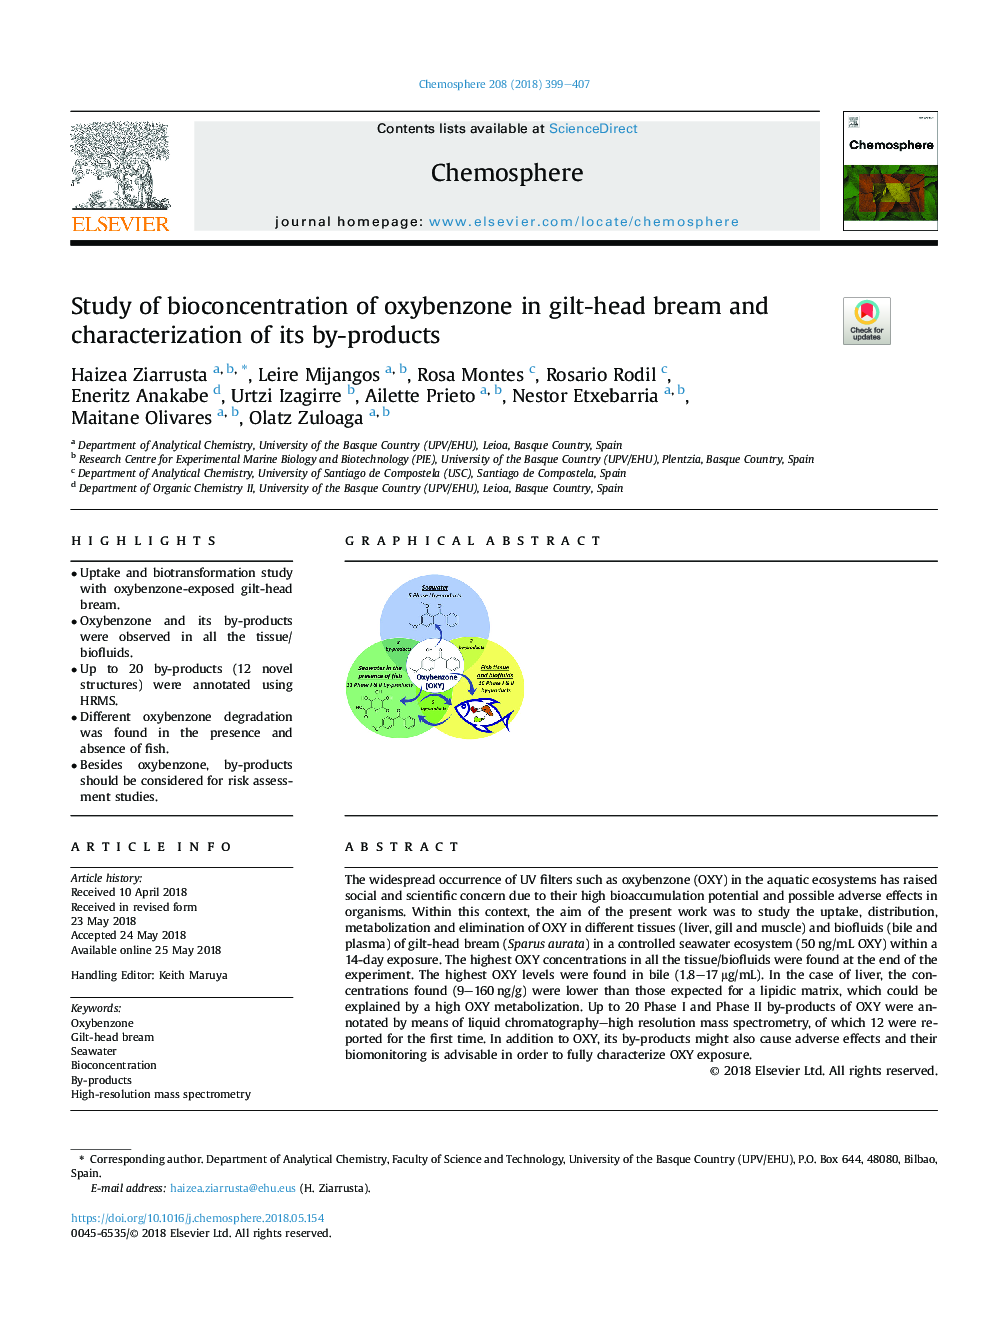 Study of bioconcentration of oxybenzone in gilt-head bream and characterization of its by-products